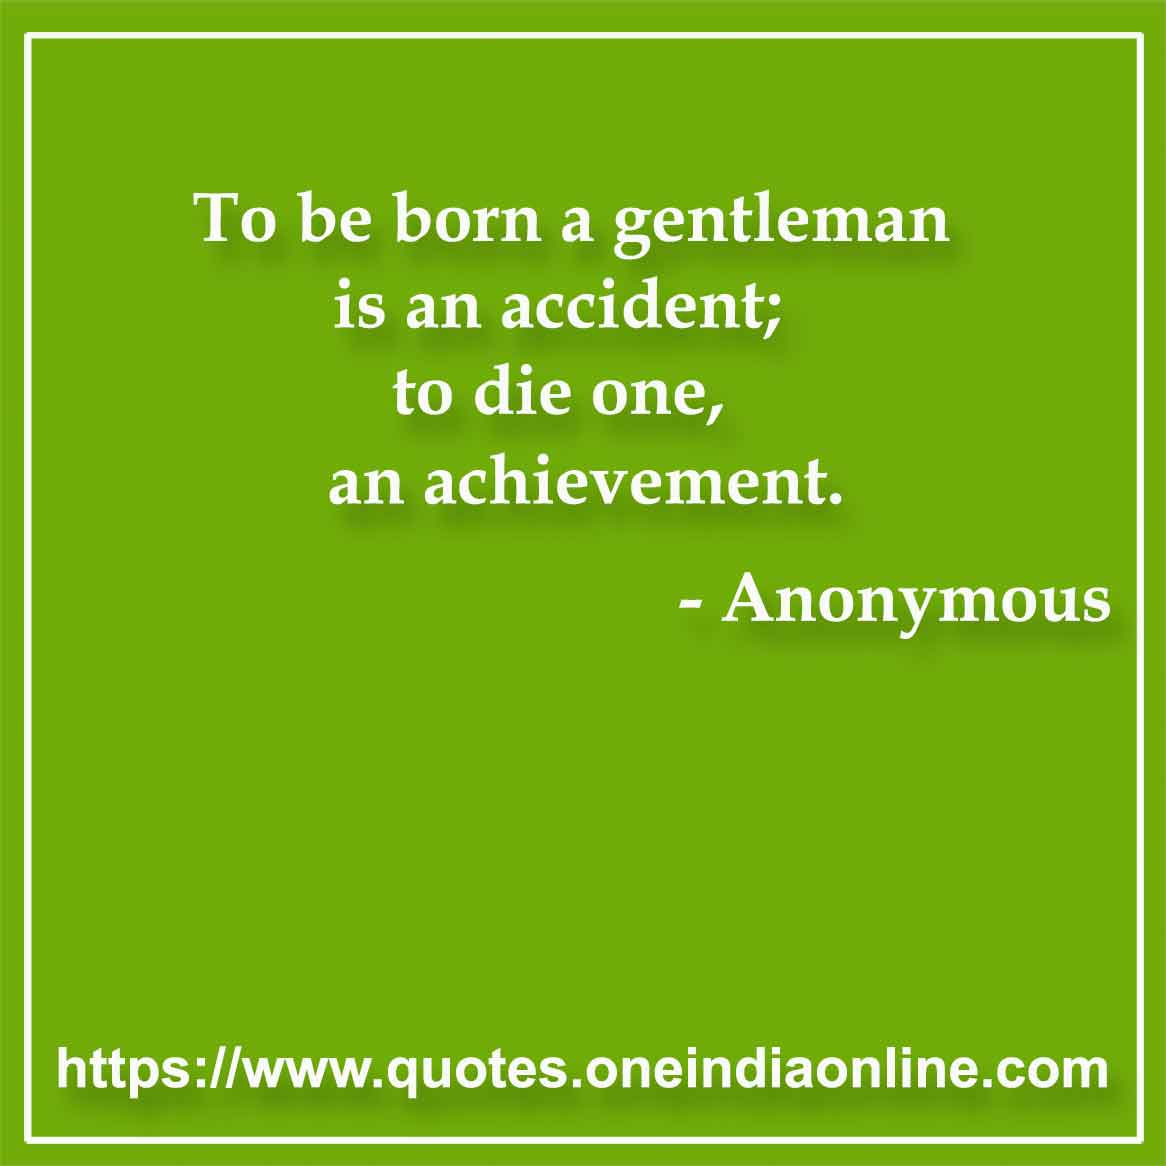 To be born a gentleman is an accident; to die one, an achievement.

- Anonymous